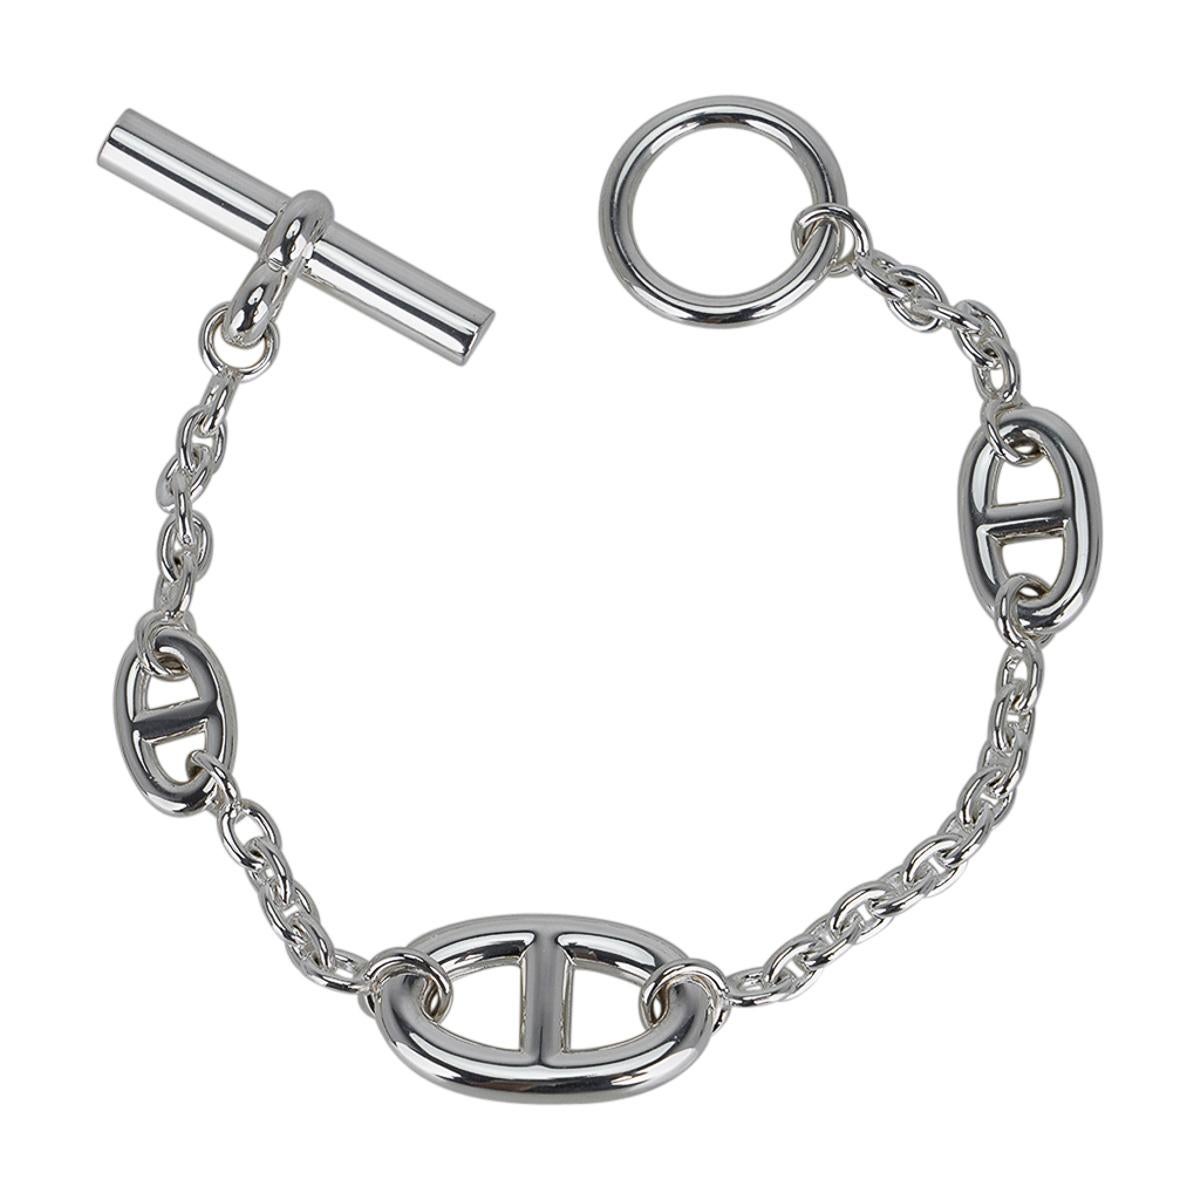 Mightychic offers an Hermes Farandole Bracelet featured in Sterling Silver.
Highlighting the iconic Chaine d'Ancre design.
Toggle closure.
The nautical Chaine d'ancre was designed as jewelry over 80 years ago by Robert Dumas.
Chic and modern.
Comes